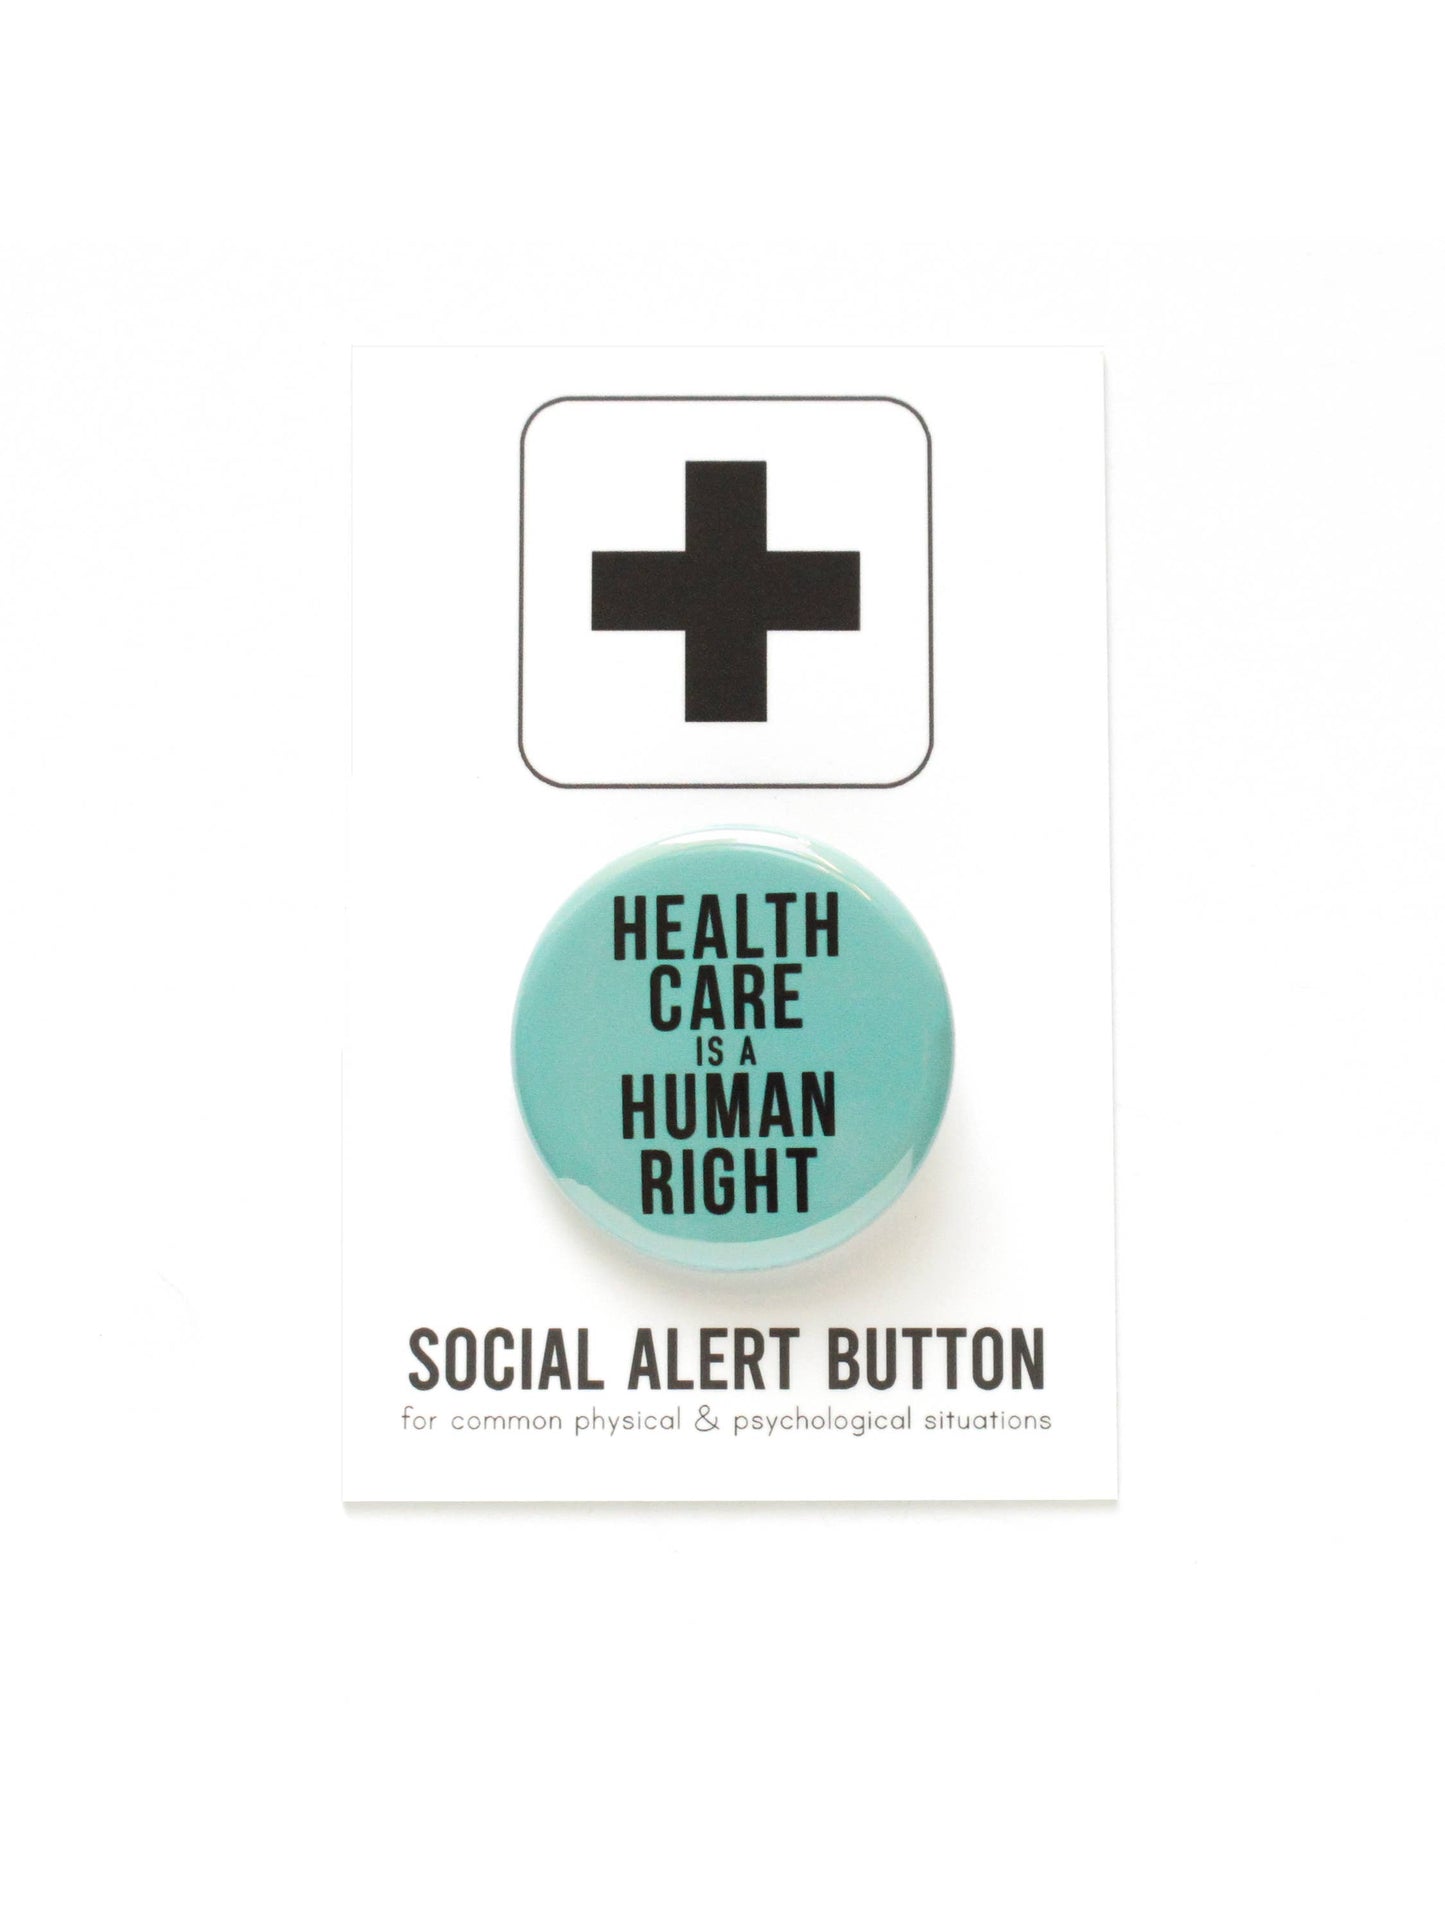 HEALTHCARE IS A HUMAN RIGHT pinback button